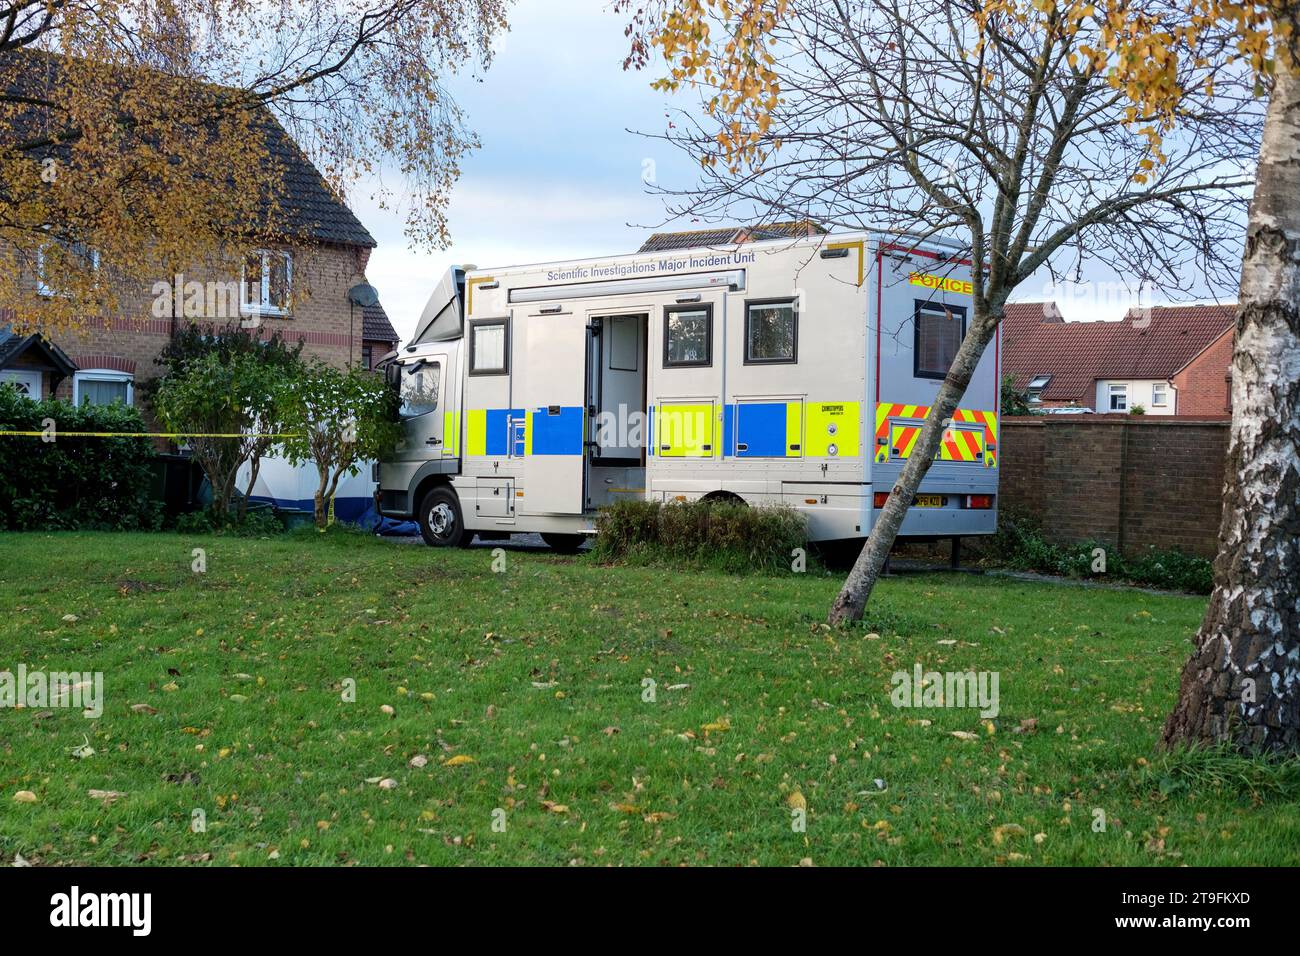 Police and scientific investigators attend an alleged muder scene at Honeysuckle close on 20th Noc 2023 Stock Photo